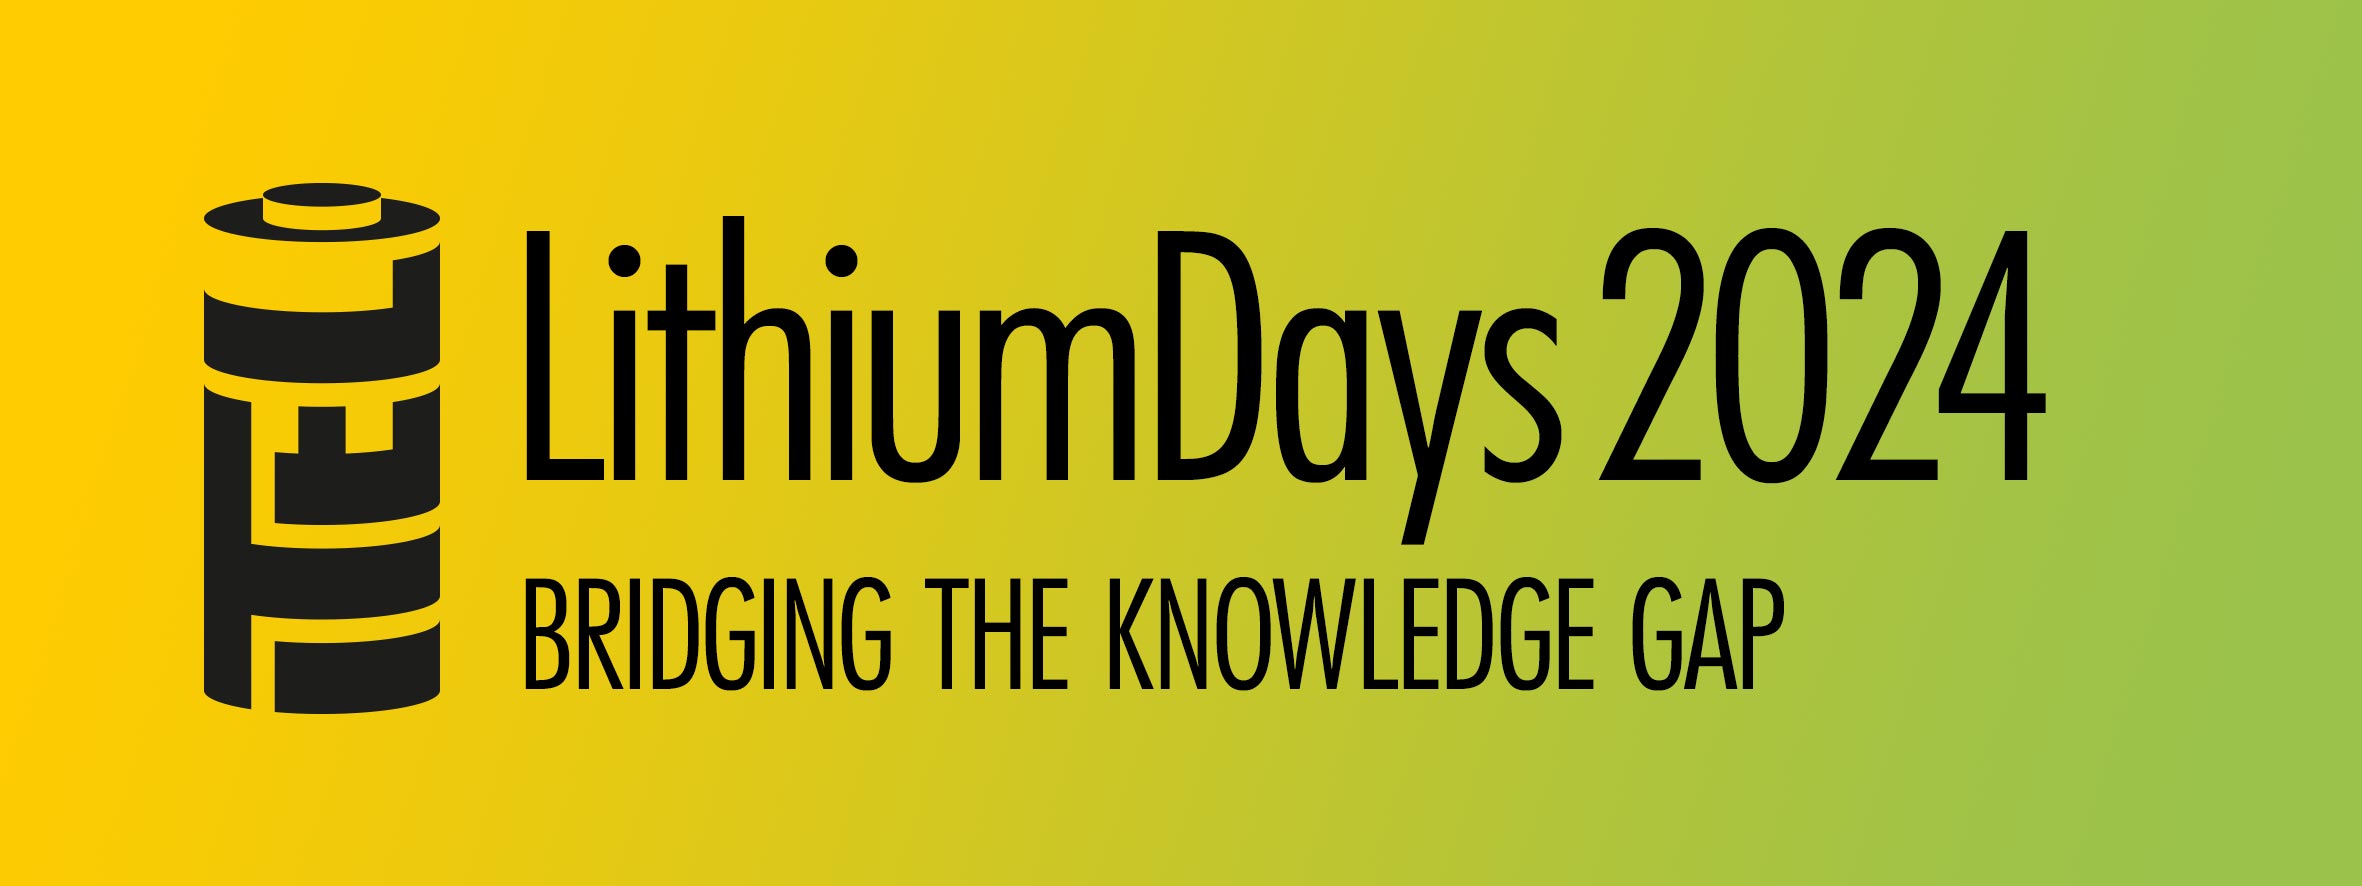 LithiumDays 2024 - How to Shoulder EU Lihium Growth